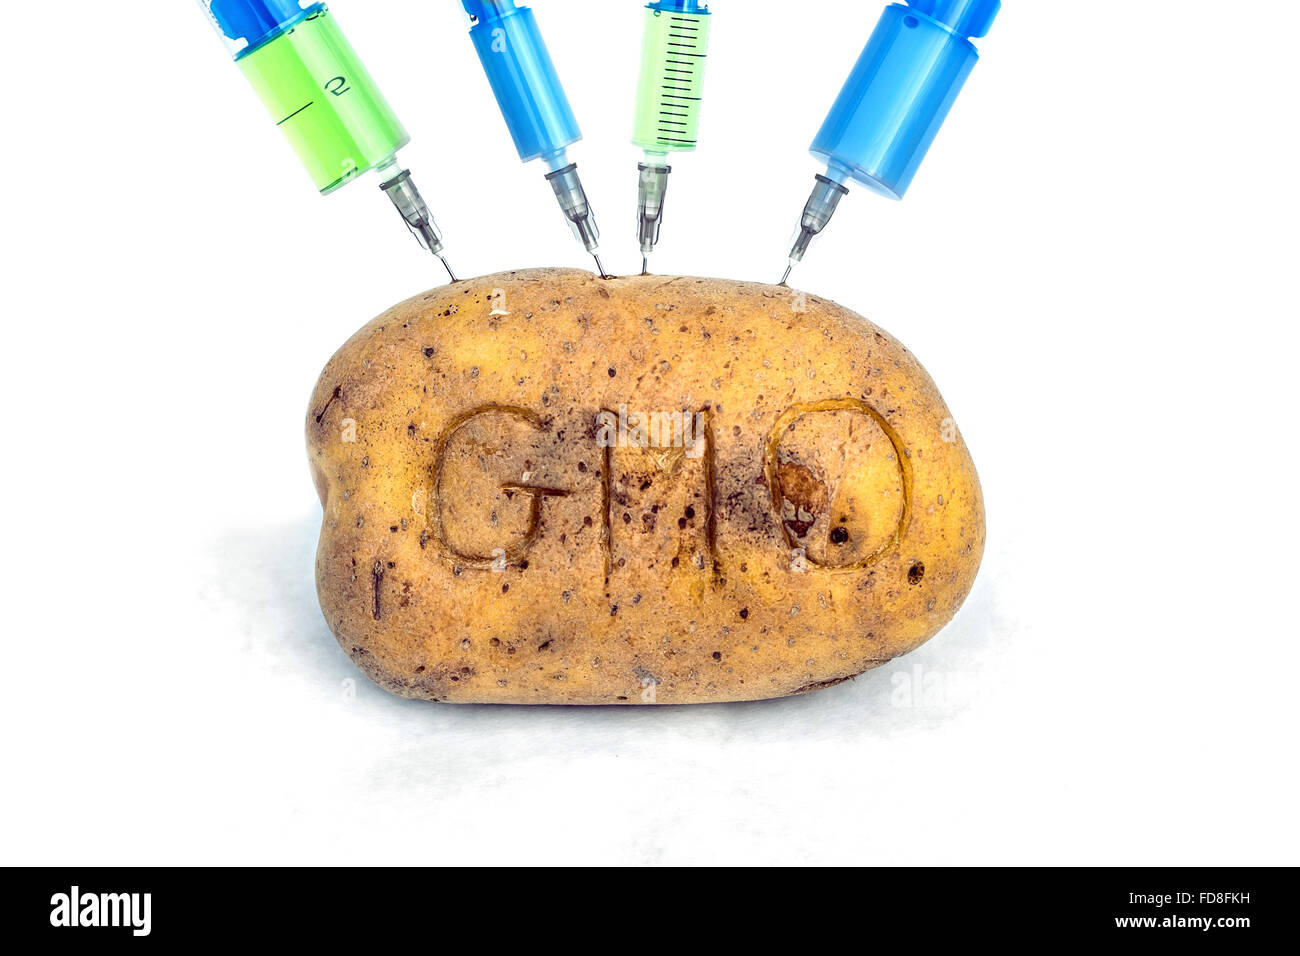 Potato with syringes (genetic modification concept) Stock Photo